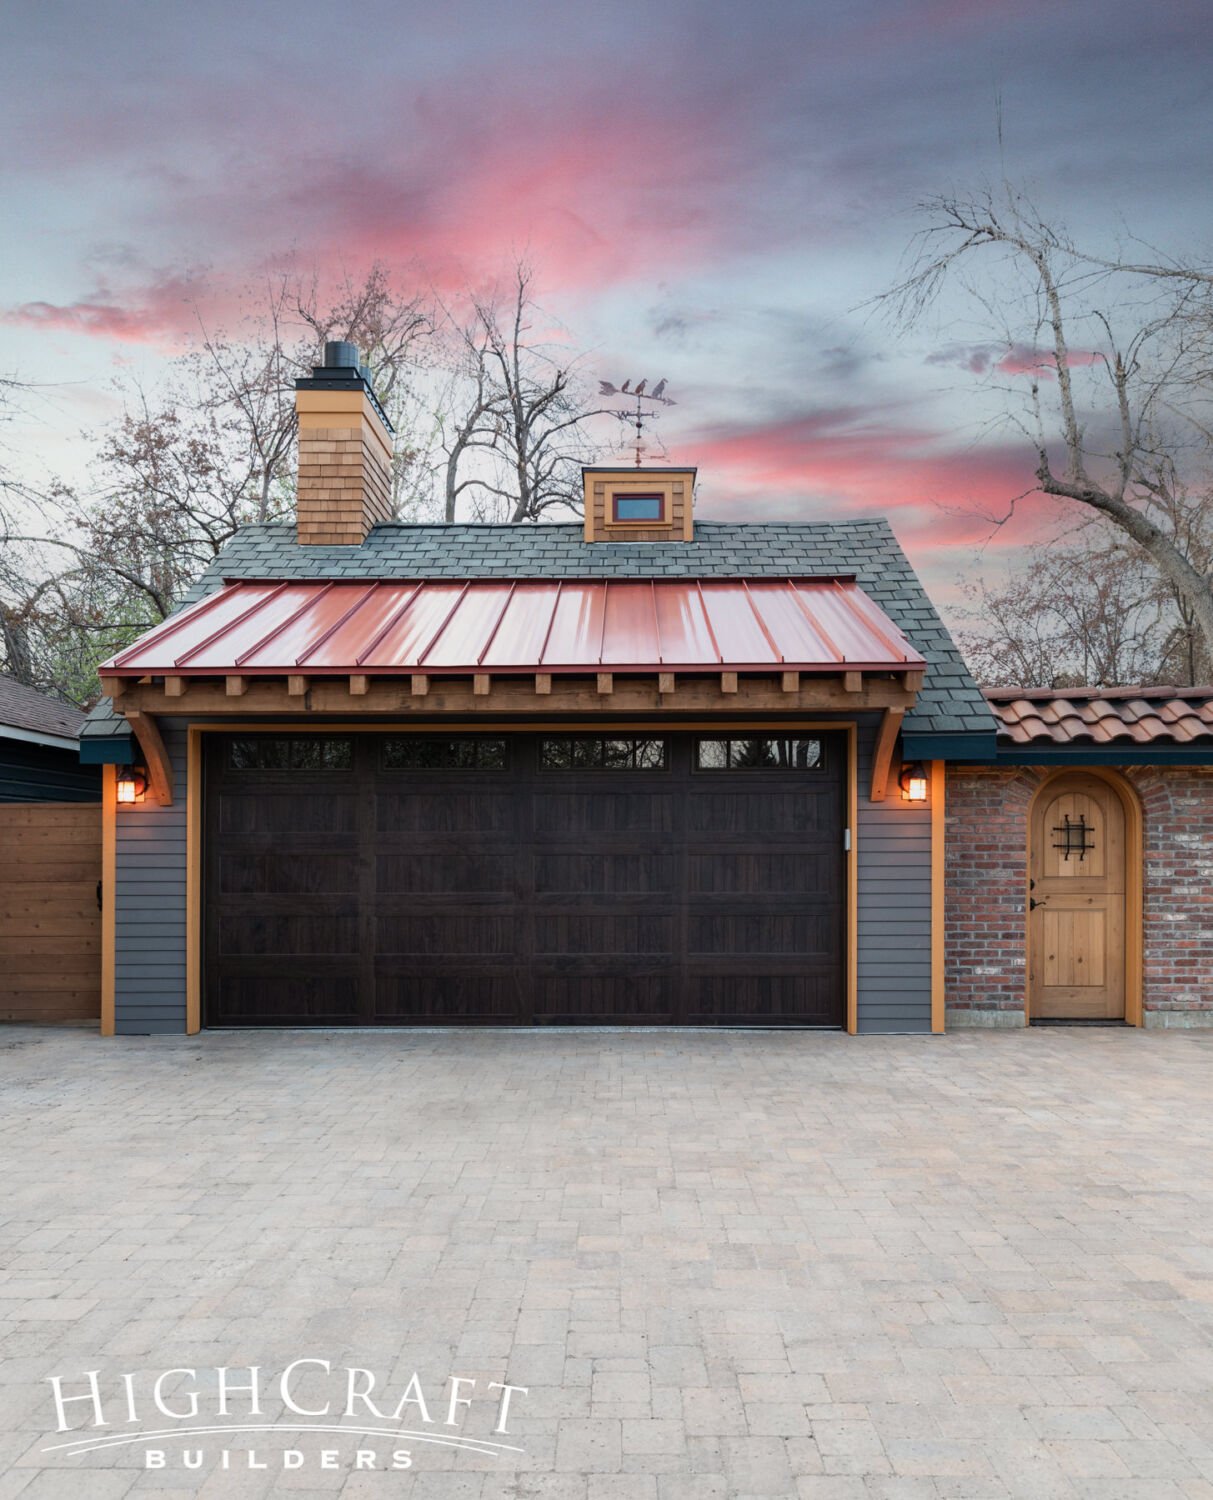 Eclectic-Remodel-in-Old-Town-Custom-Bungalow-Styled-De-tached-Garage-Doors